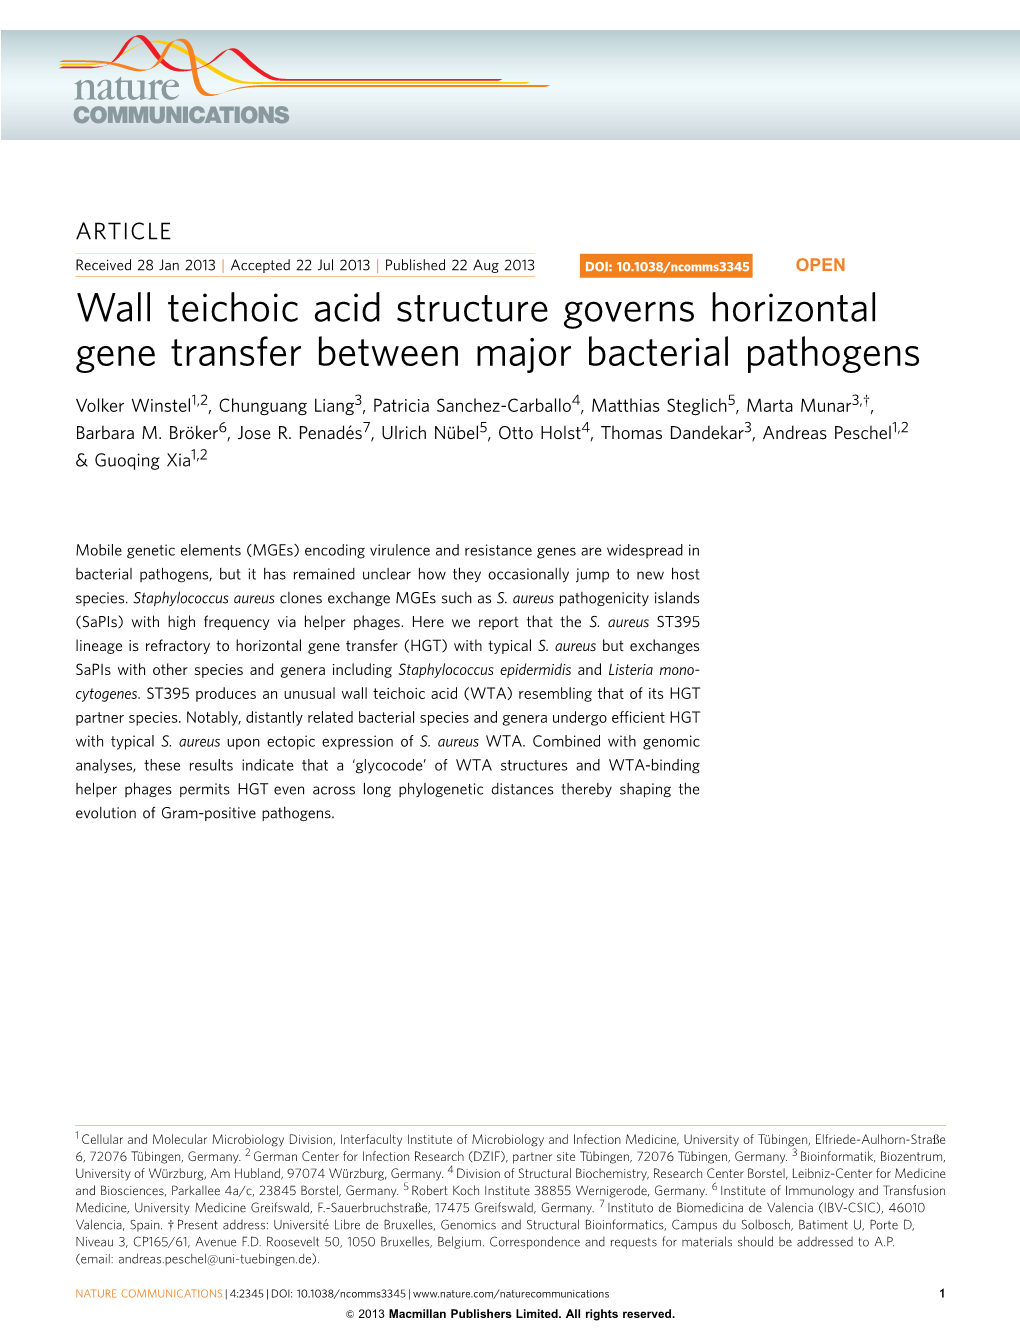 Wall Teichoic Acid Structure Governs Horizontal Gene Transfer Between Major Bacterial Pathogens